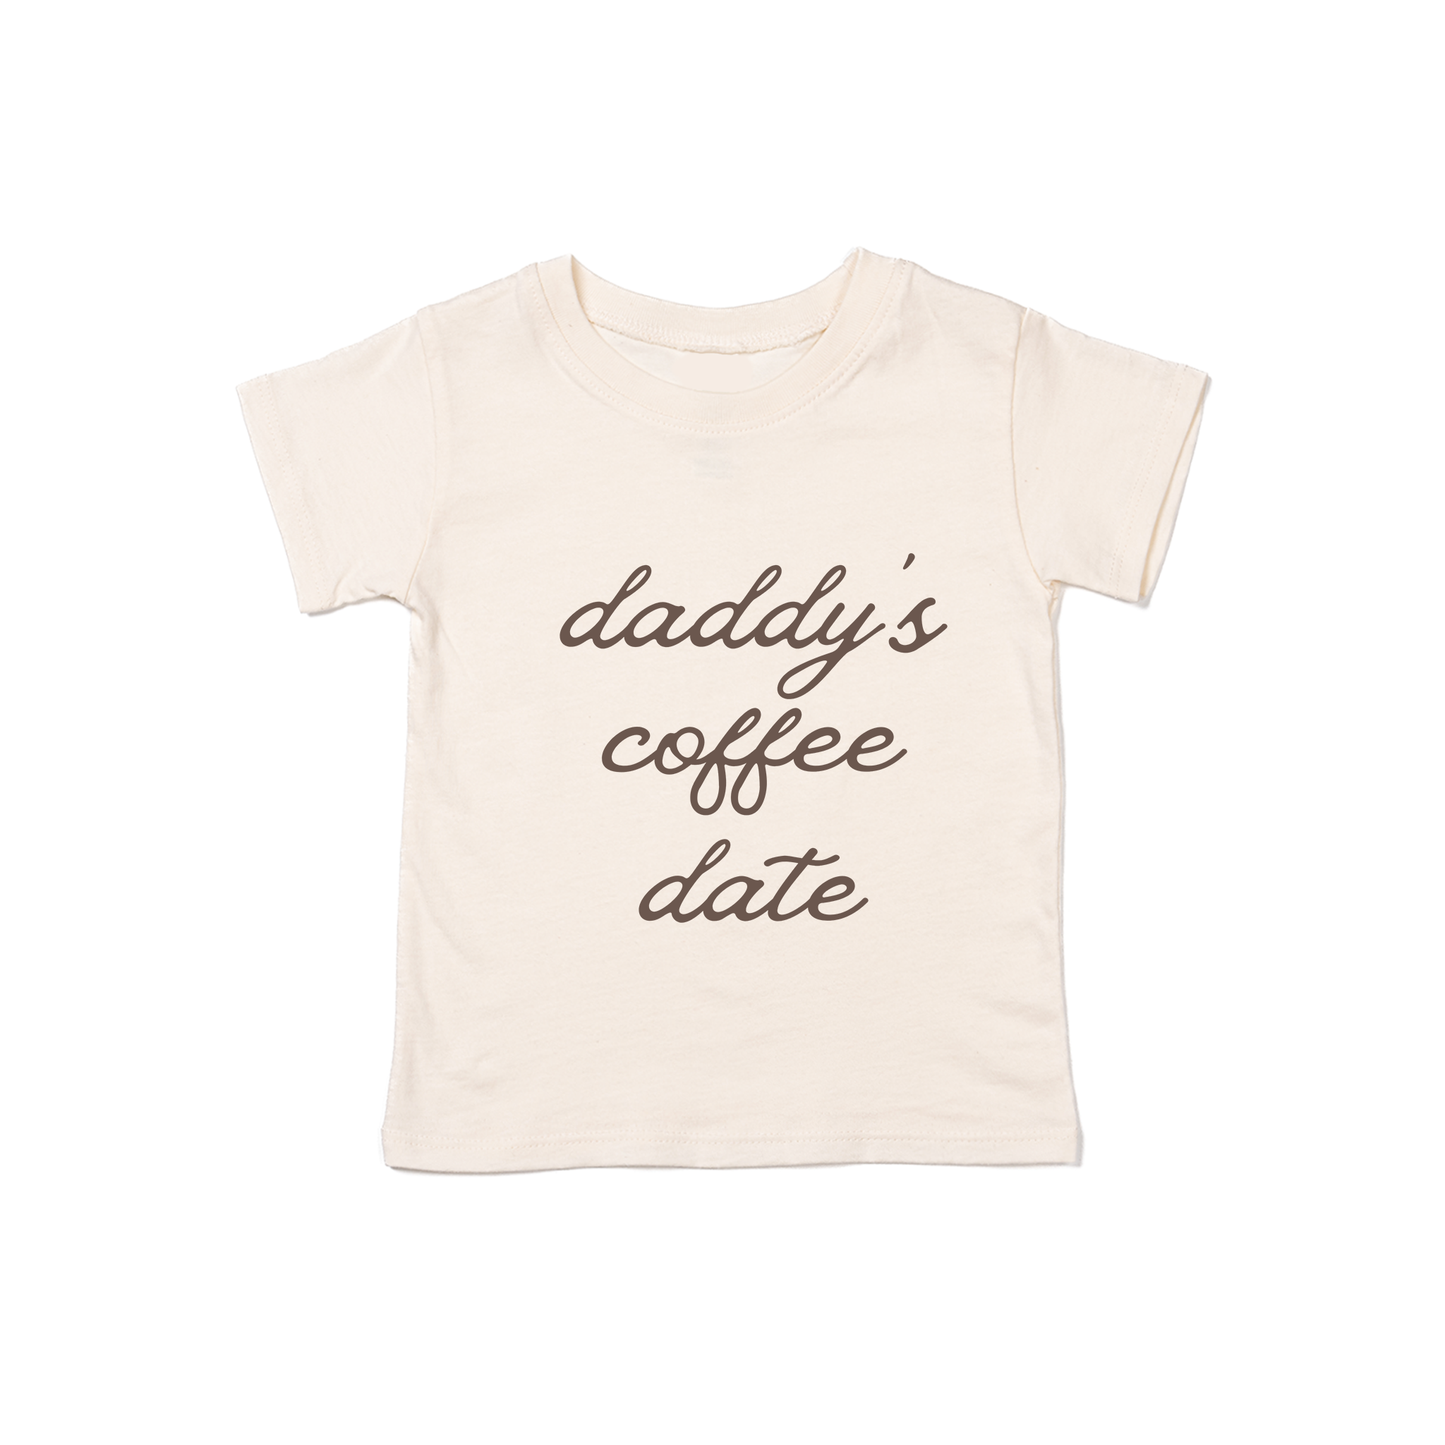 Daddy's Coffee Date - Kids Tee (Natural)